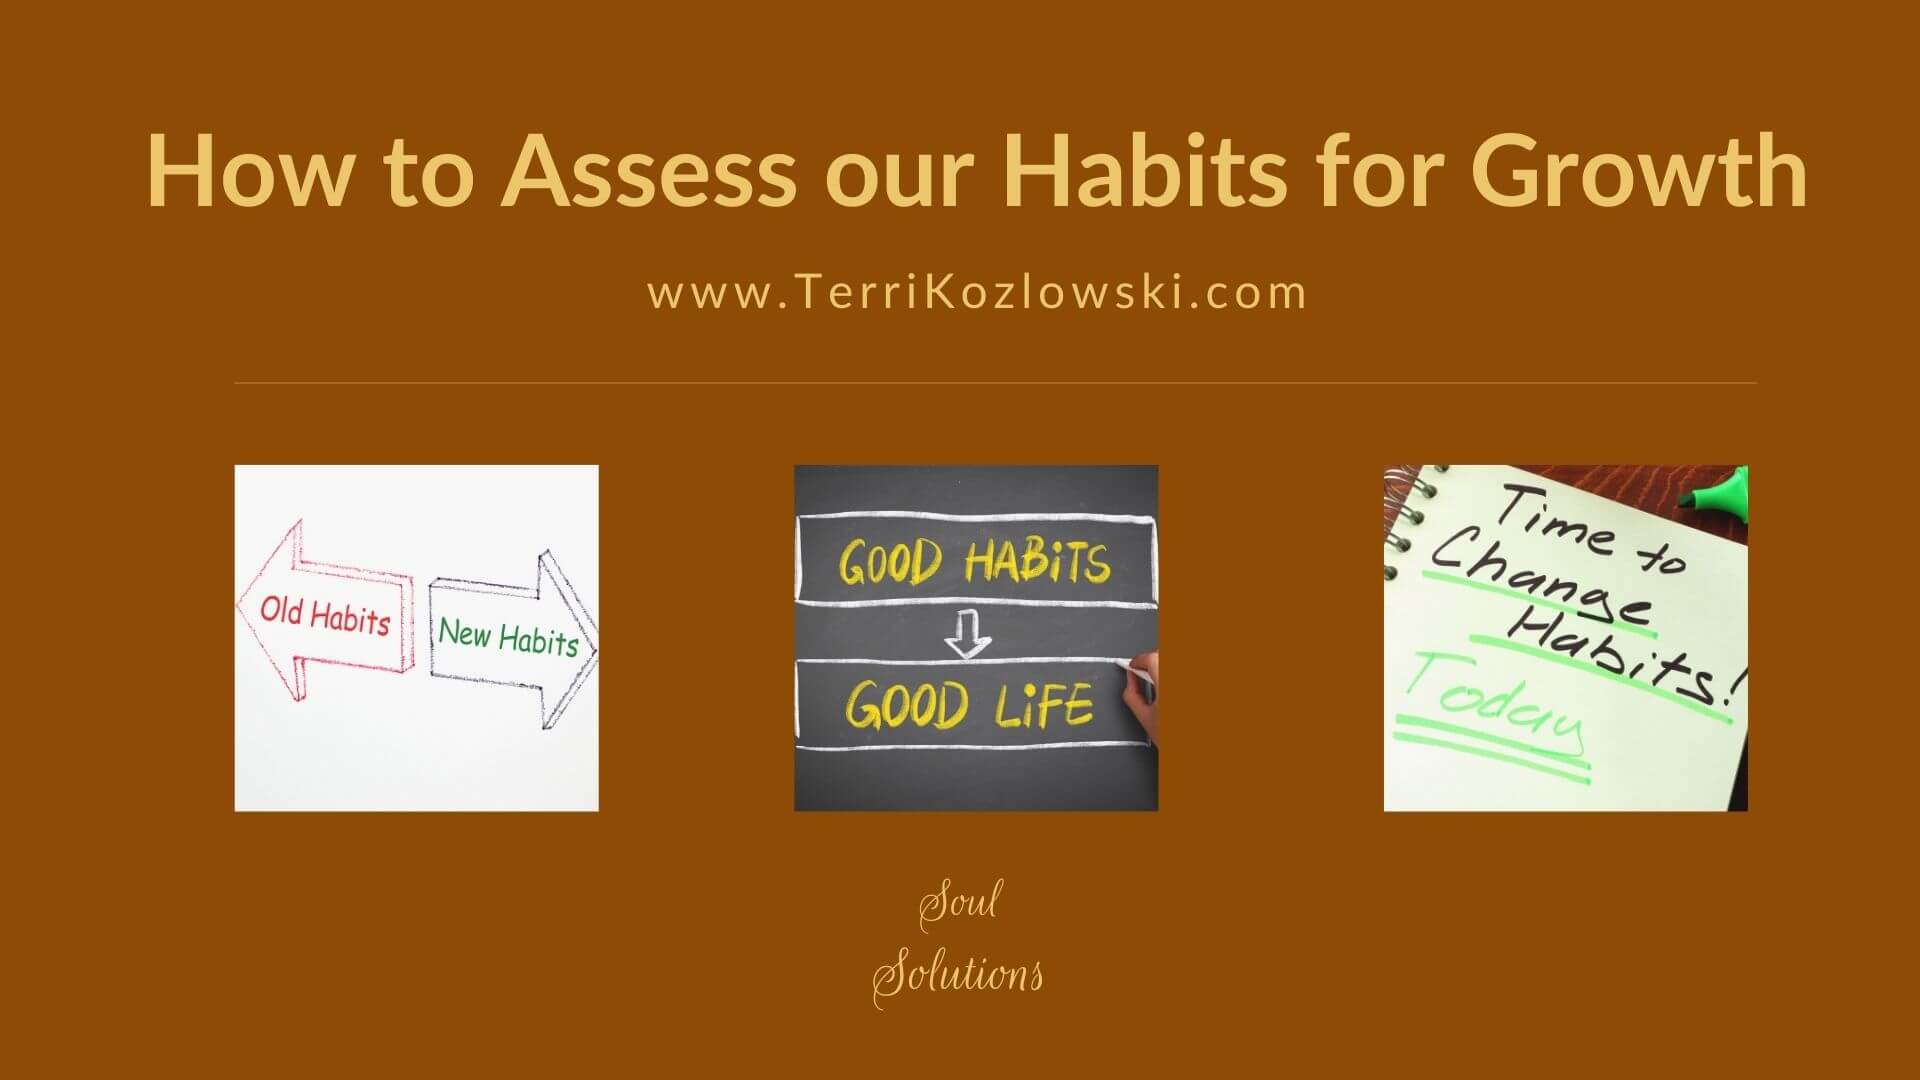 How to Assess Our Habits for Growth